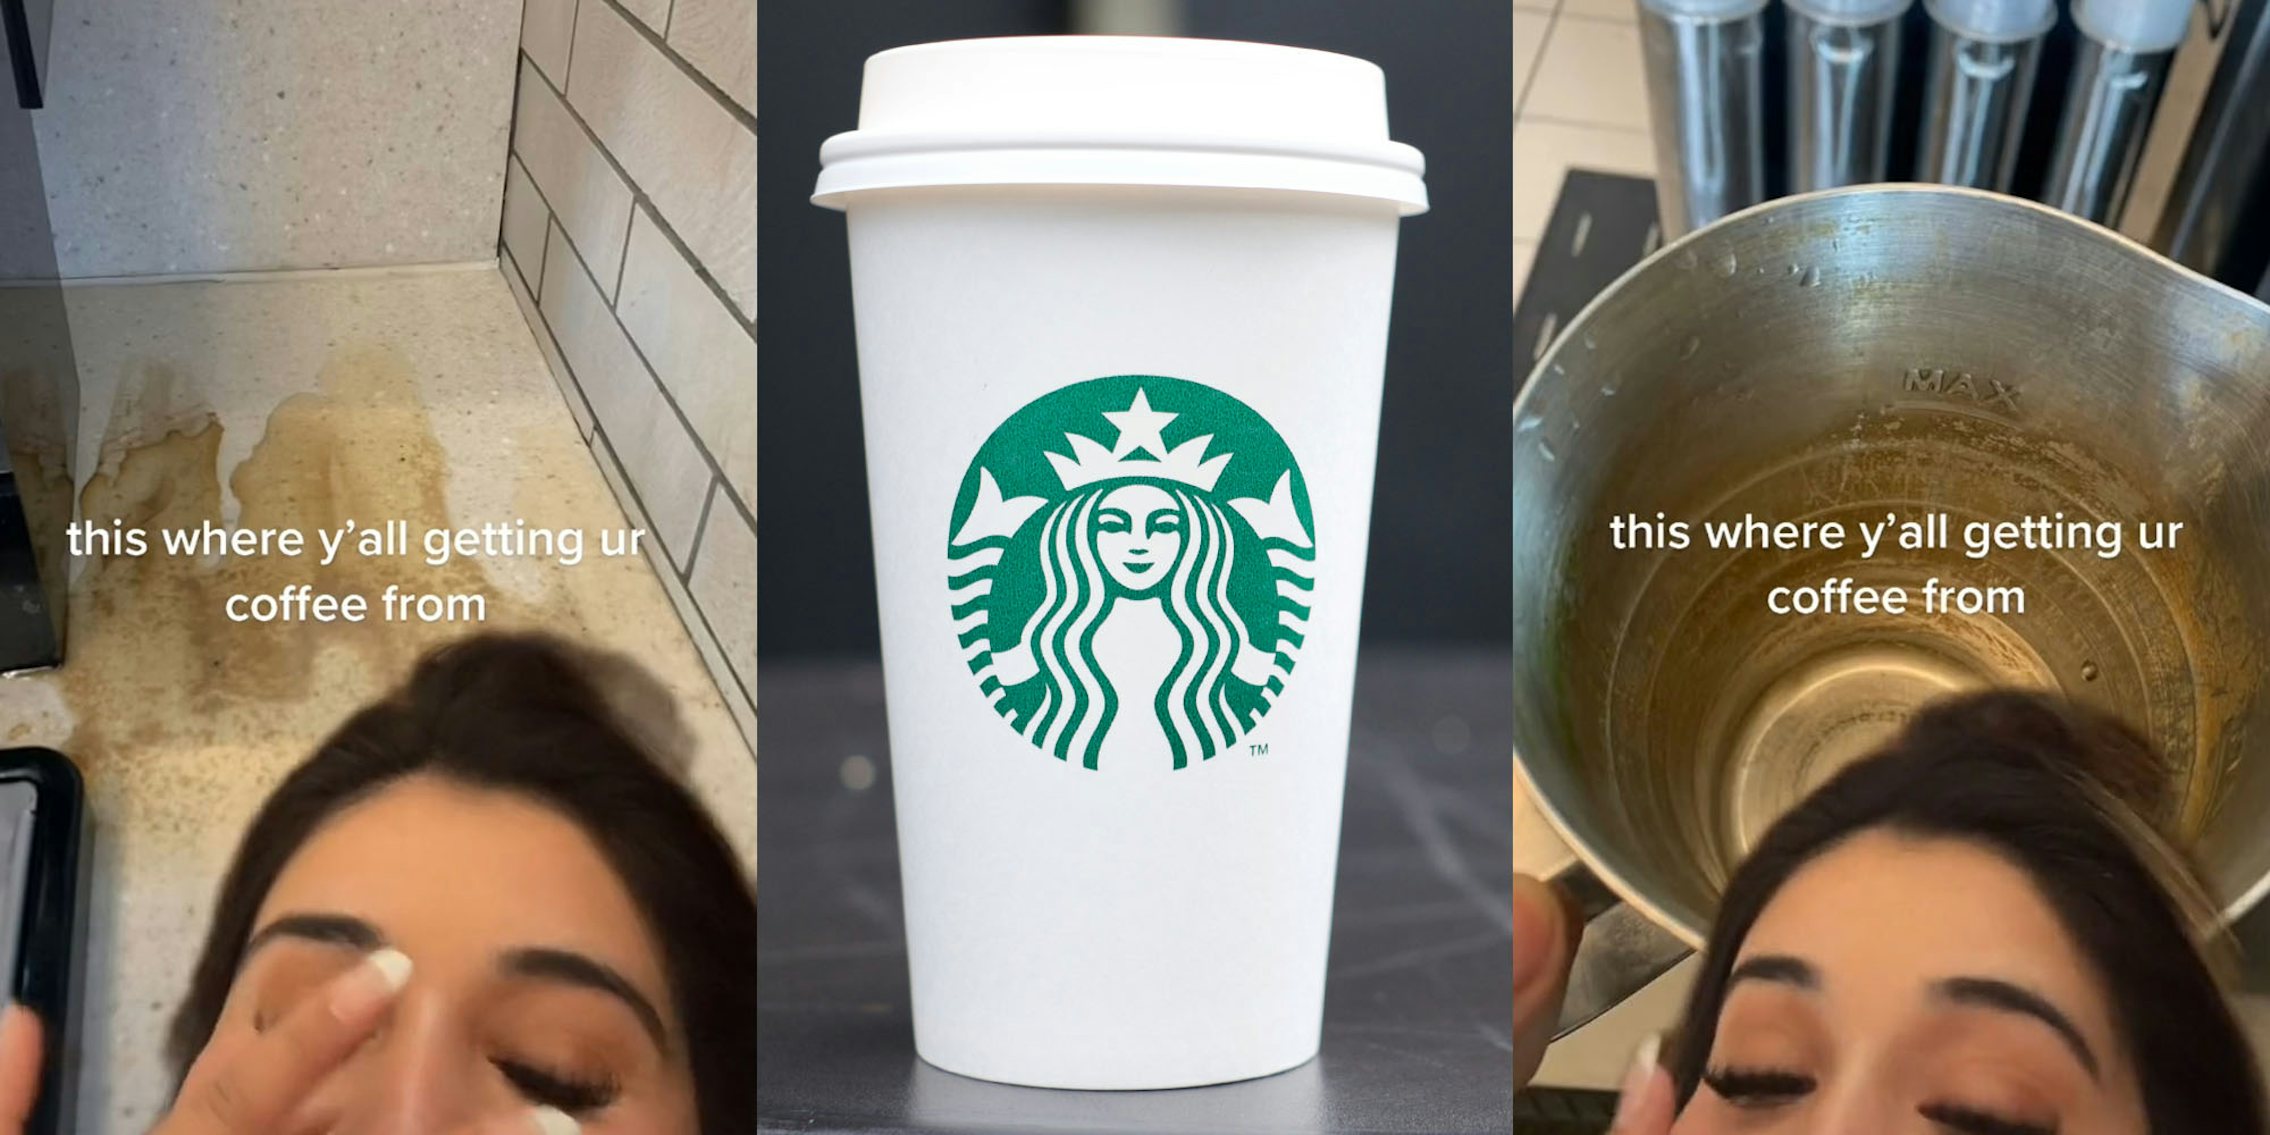 Greenscreen video showing brown liquid on counter woman hand up caption 'this is where y'all getting ur coffee from' (l) Starbucks cup on table gray background (c) greenscreen video bowl dirty woman hand up caption 'this is where y'all getting ur coffee from' (r)